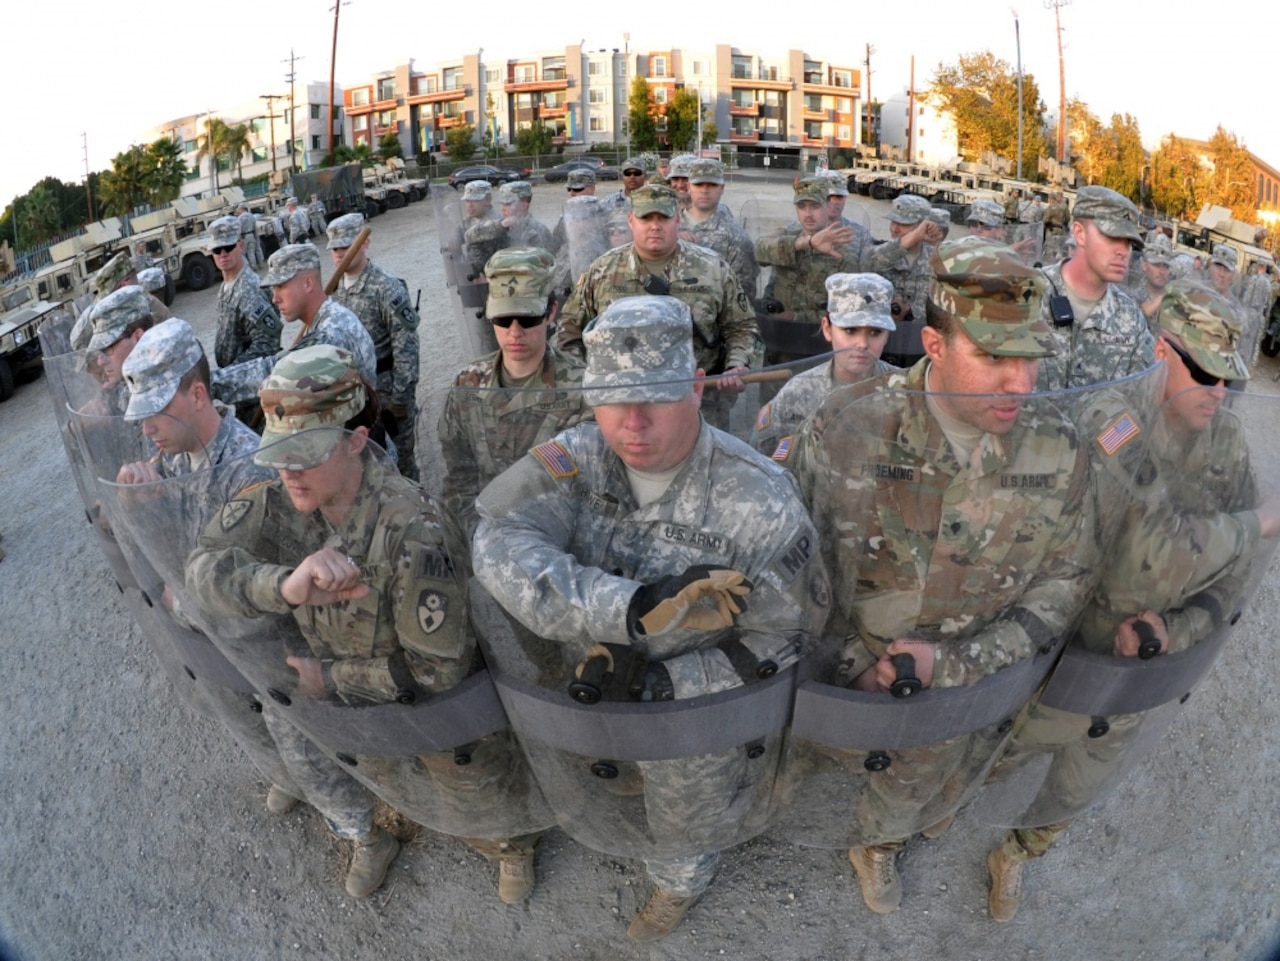 Members of the 270th and 649th Military Police Companies, 49th Military Police Brigade, California Army National Guard, move into formation to respond to a civil disturbance in Los Angeles, Nov. 17, 2016, during Exercise Vigilant Guard 17 at the Federal Emergency Management Agency Headquarters, California Task Force I, Los Angeles. Army National Guard photo by Staff Sgt. Eddie Siguenza